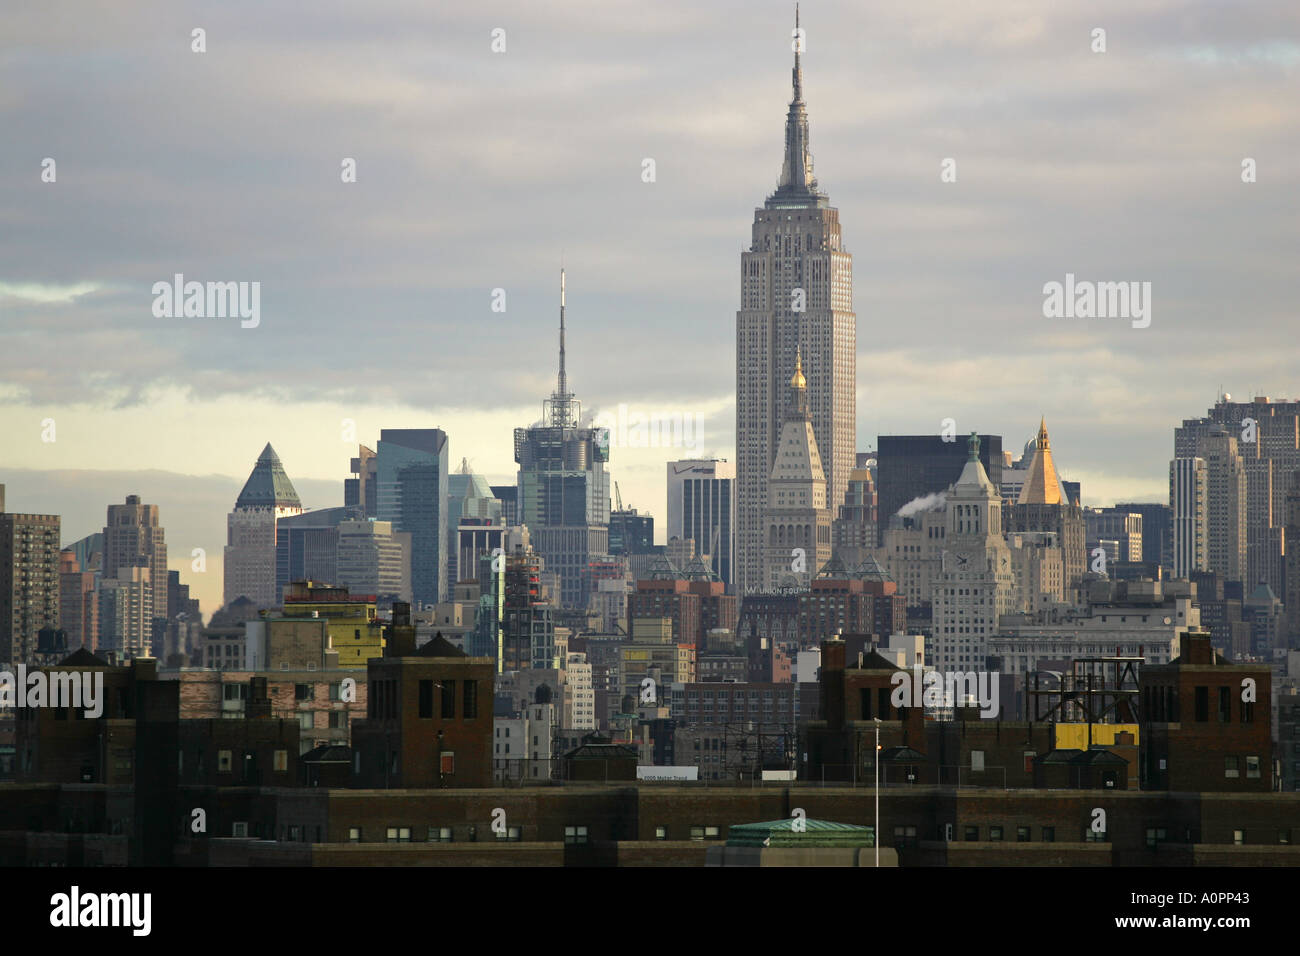 Famous landmark the Empire State Building and New York City skyline viewed from the Brooklyn Bridge New York City USA America Stock Photo